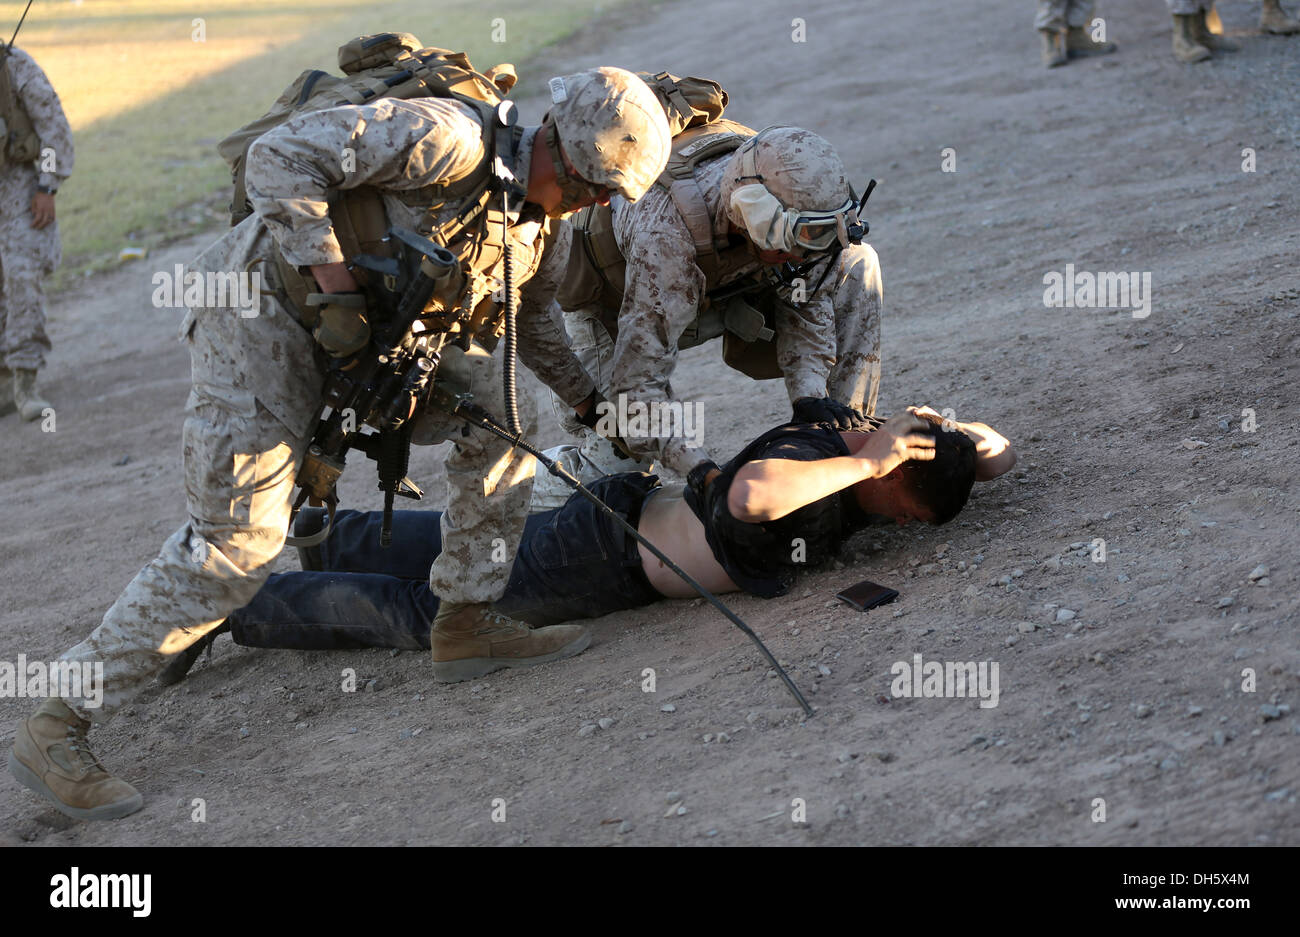 MARINE CORPS AIR STATION YUMA, Ariz. – Marines with Bravo Company, 1st Battalion, 7th Marine Regiment, detain a role-player during a noncombatant evacuation operation training exercise here, Oct. 18, 2013. The Bravo Co. Marines and corpsmen treated ill or Stock Photo